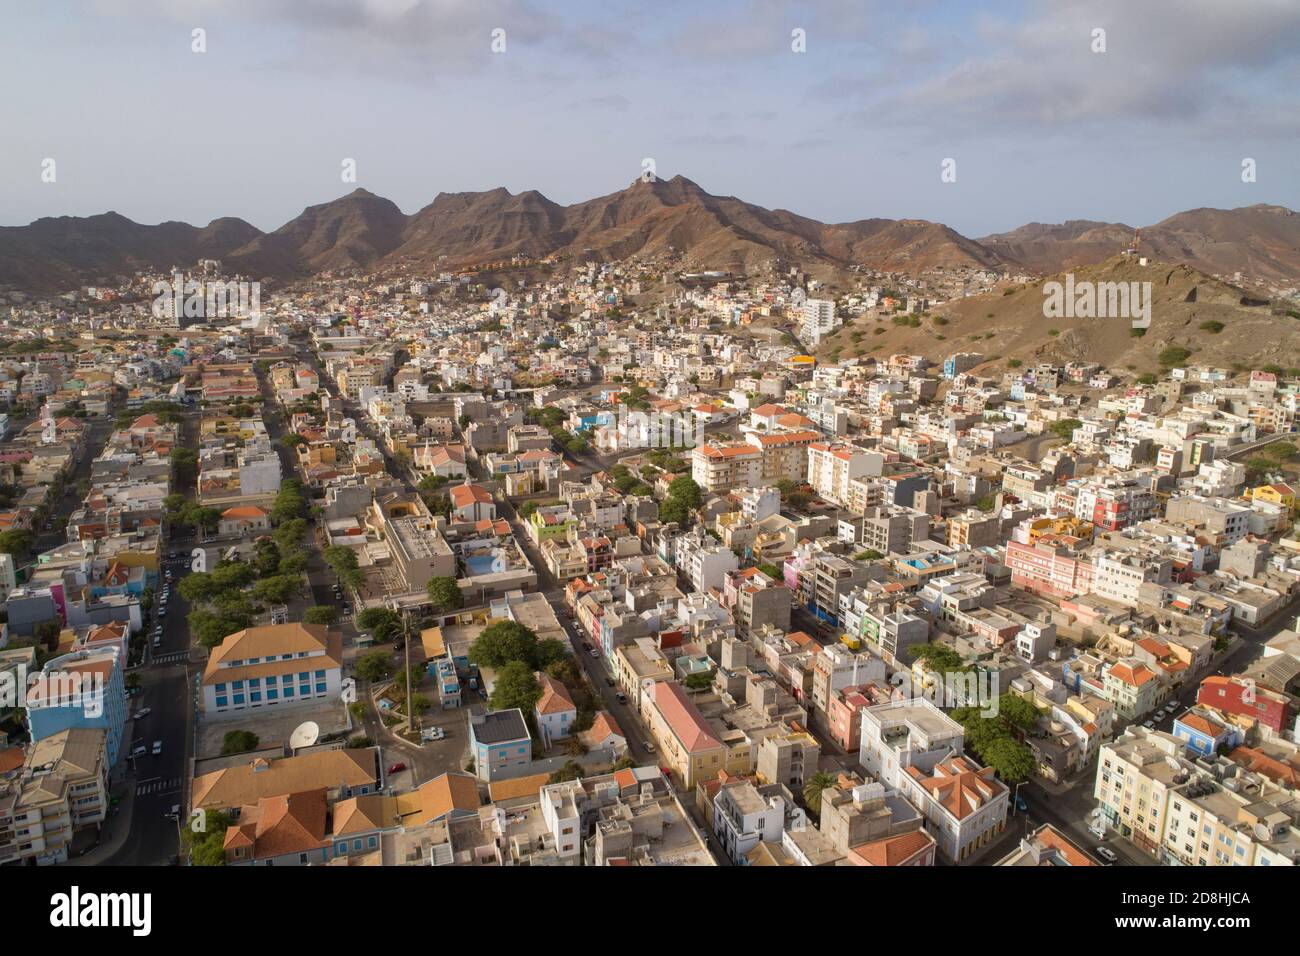 Mindelo is the vibrant, colorful capital of Sao Vicente, Cabo Verde. Stock Photo